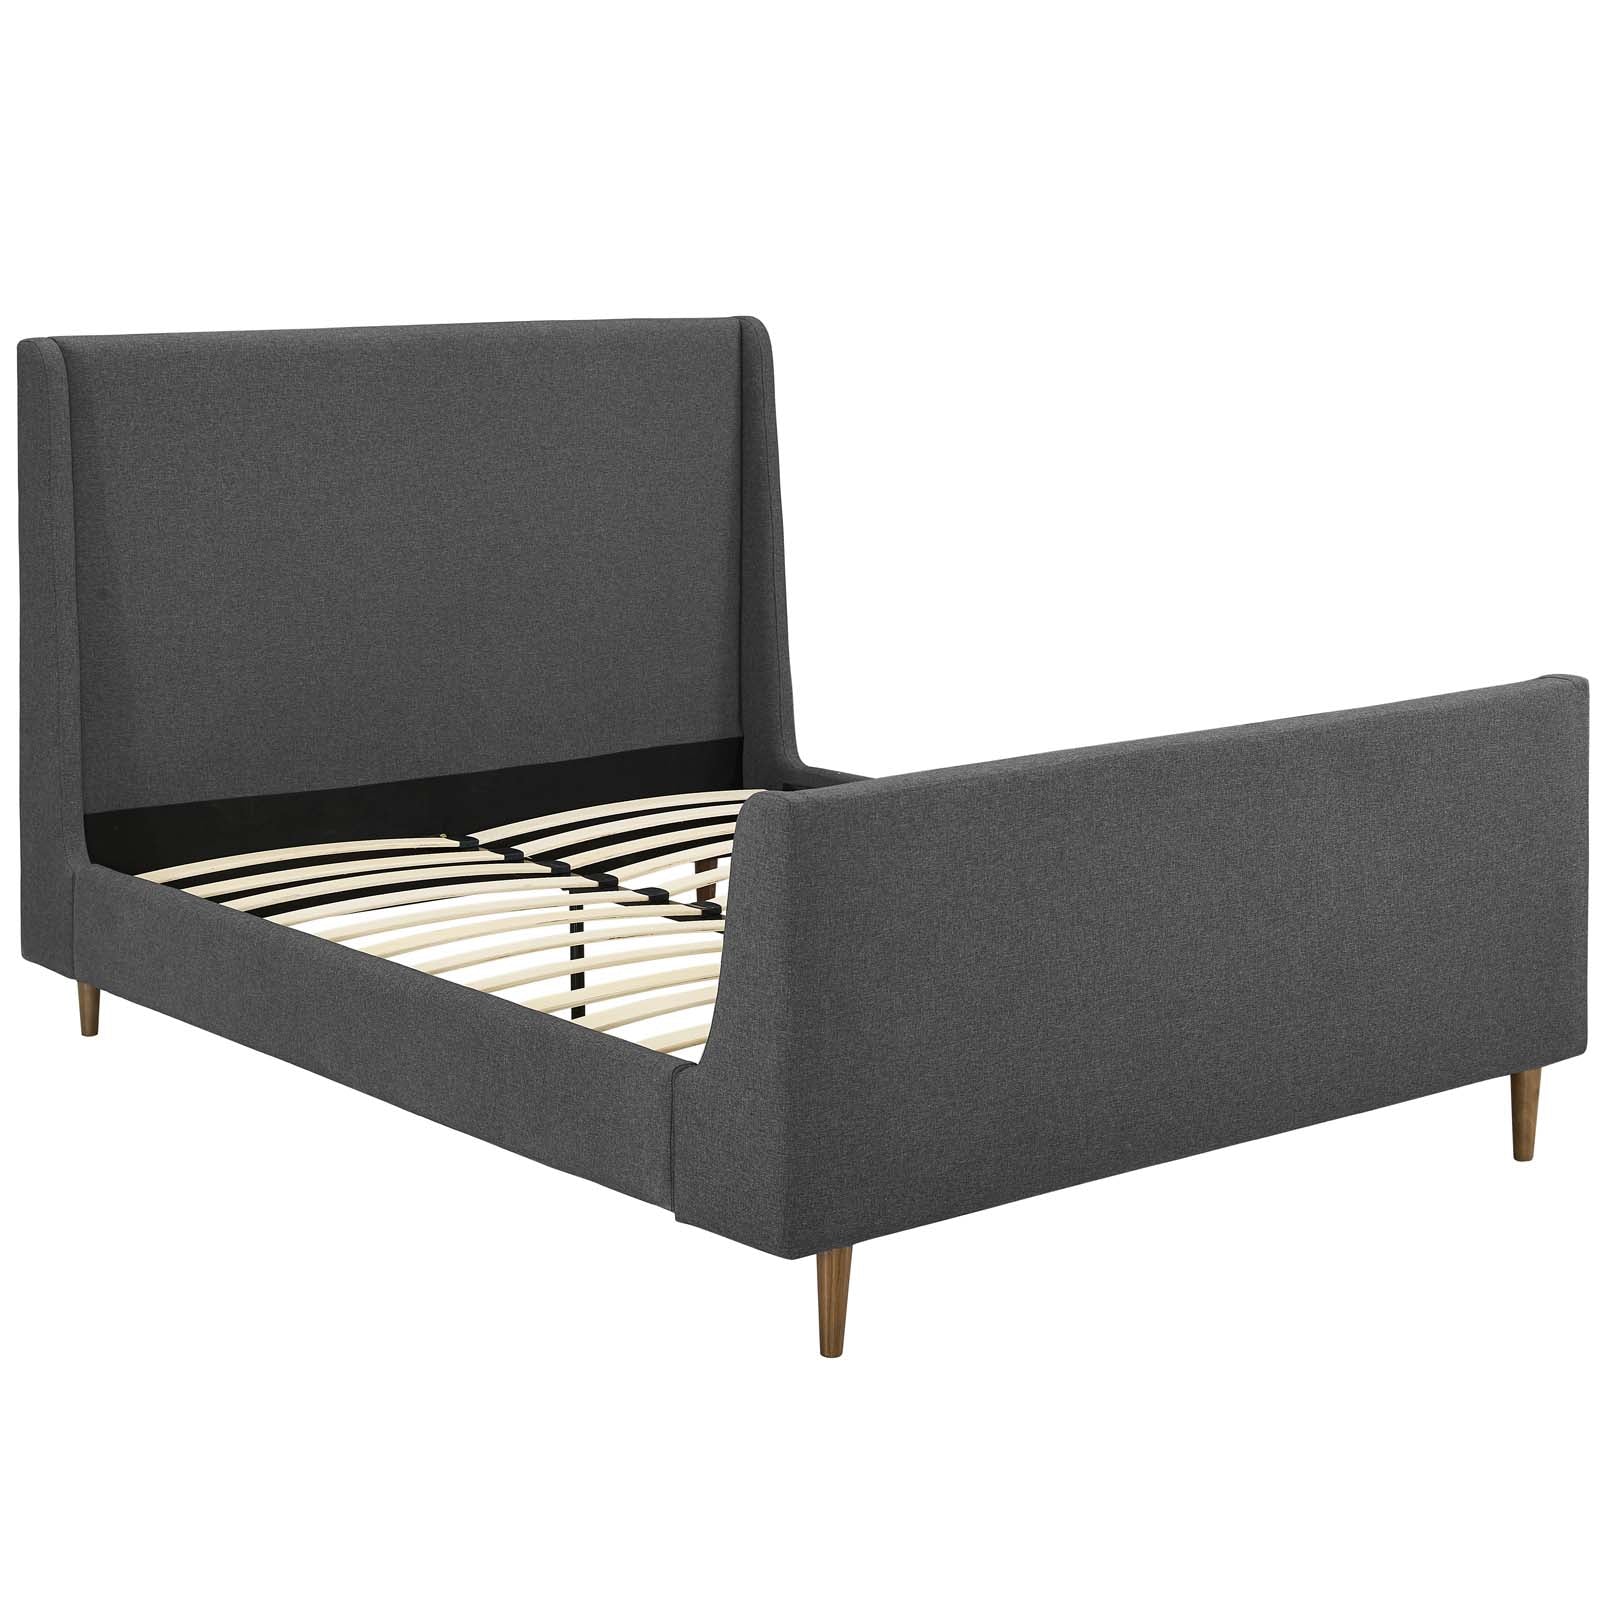 Aubree Queen Upholstered Fabric Sleigh Platform Bed - East Shore Modern Home Furnishings